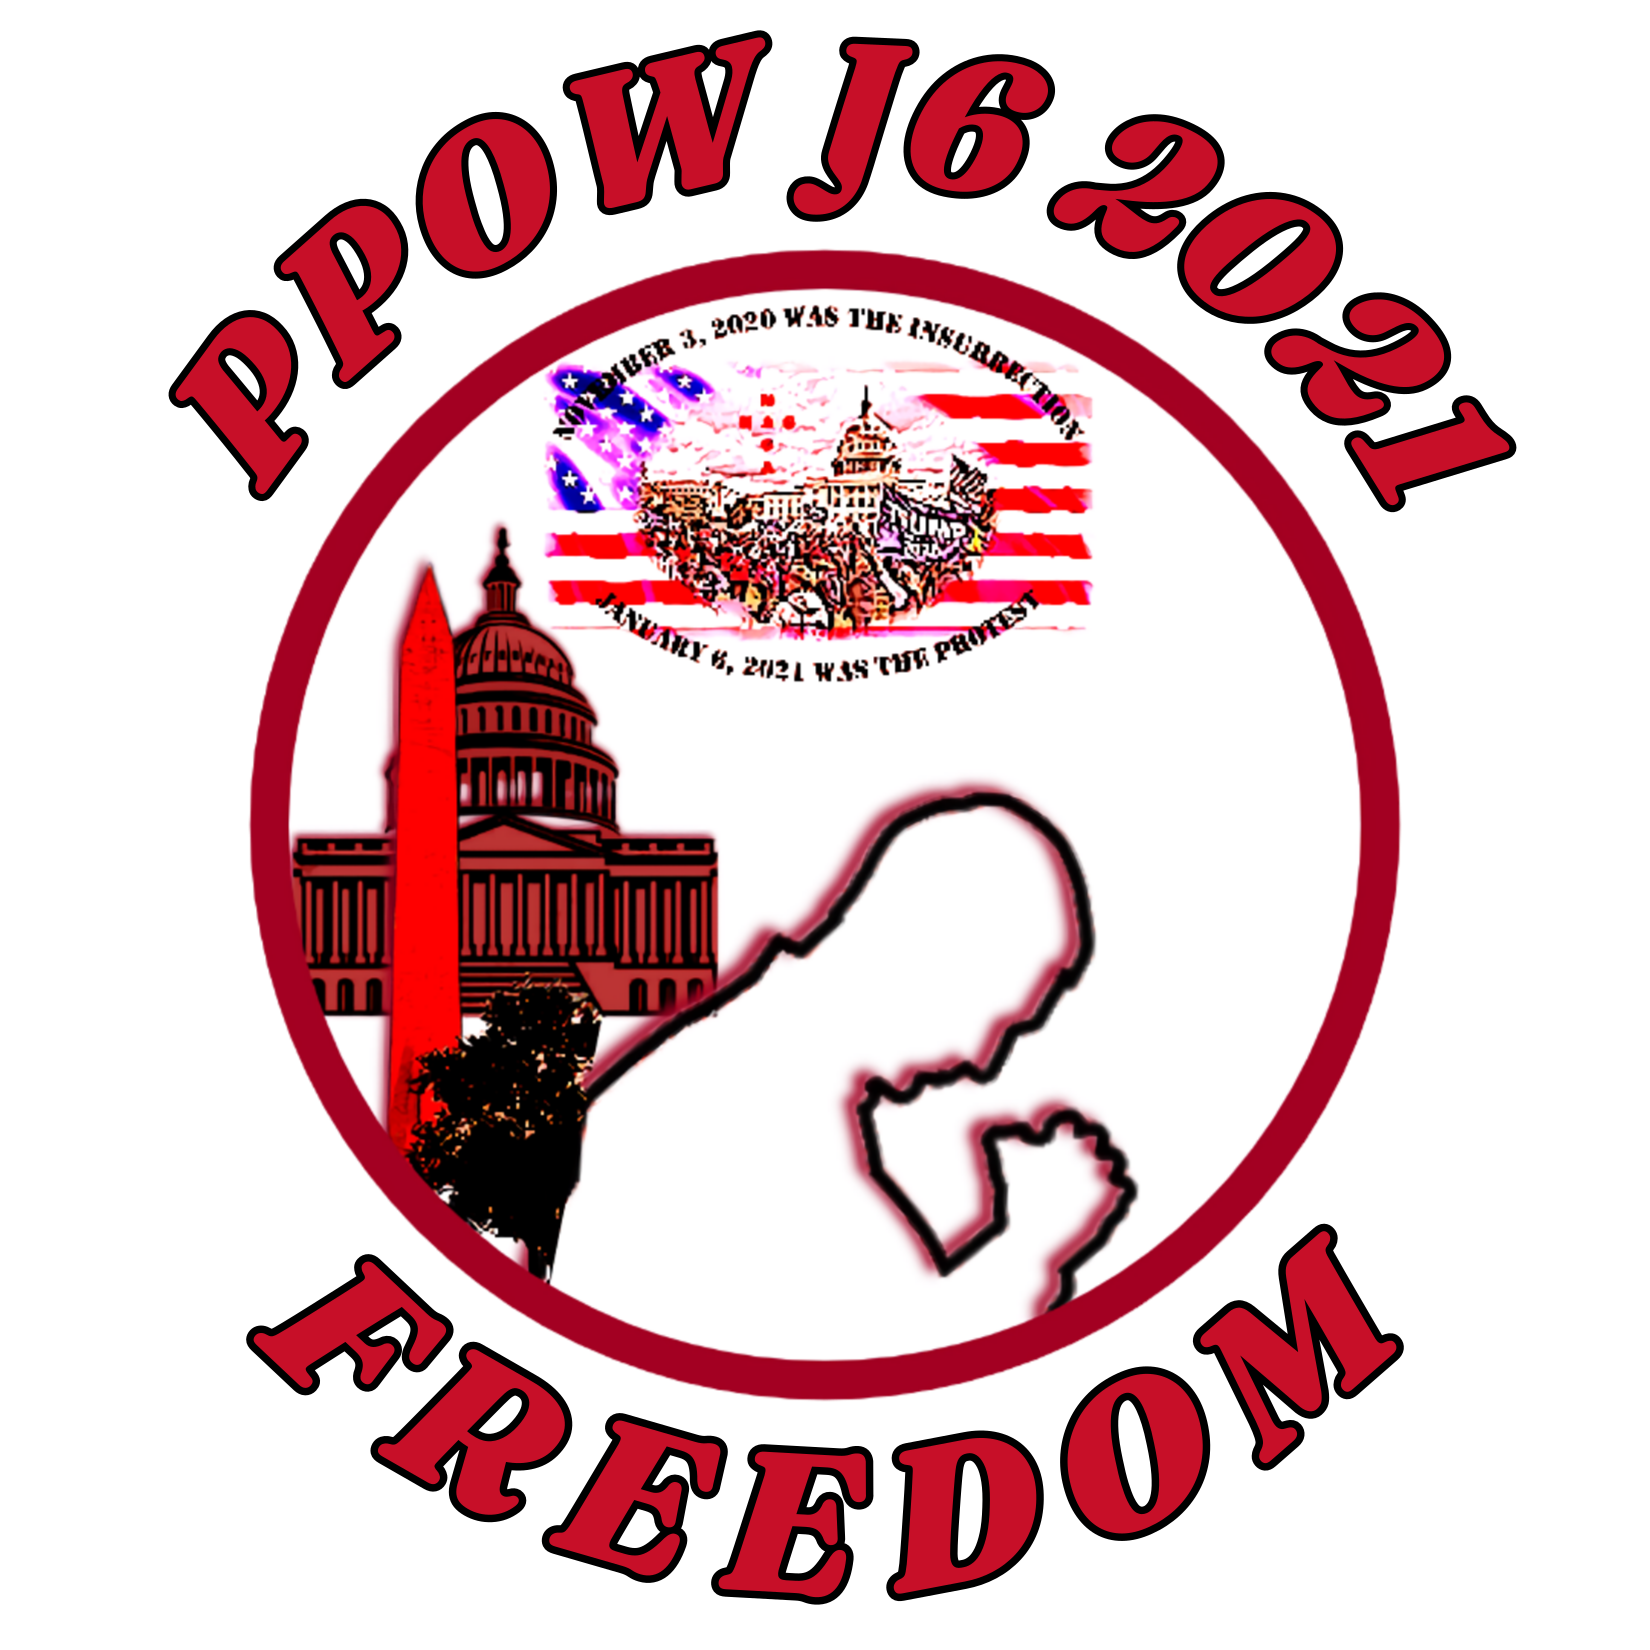 Update Update #114 Today is day #618 my husband has been held in in DCGitmo as a PPOW J6 Image